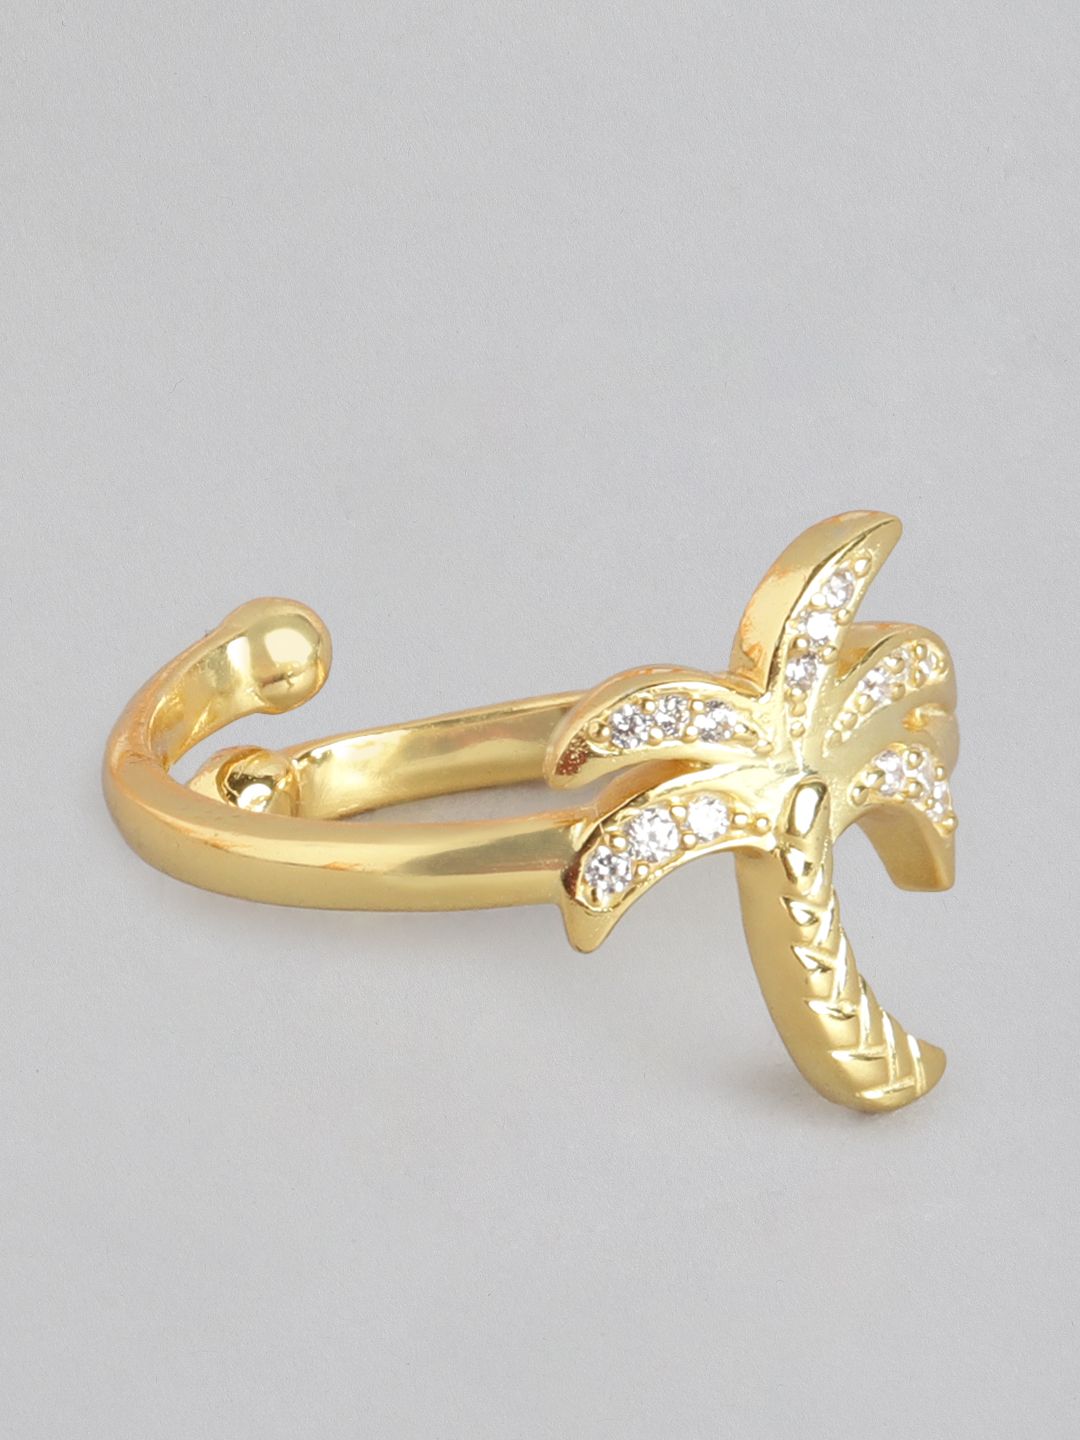 Carlton London Gold-Plated Cubic Zirconia Adjustable Ring Price in India